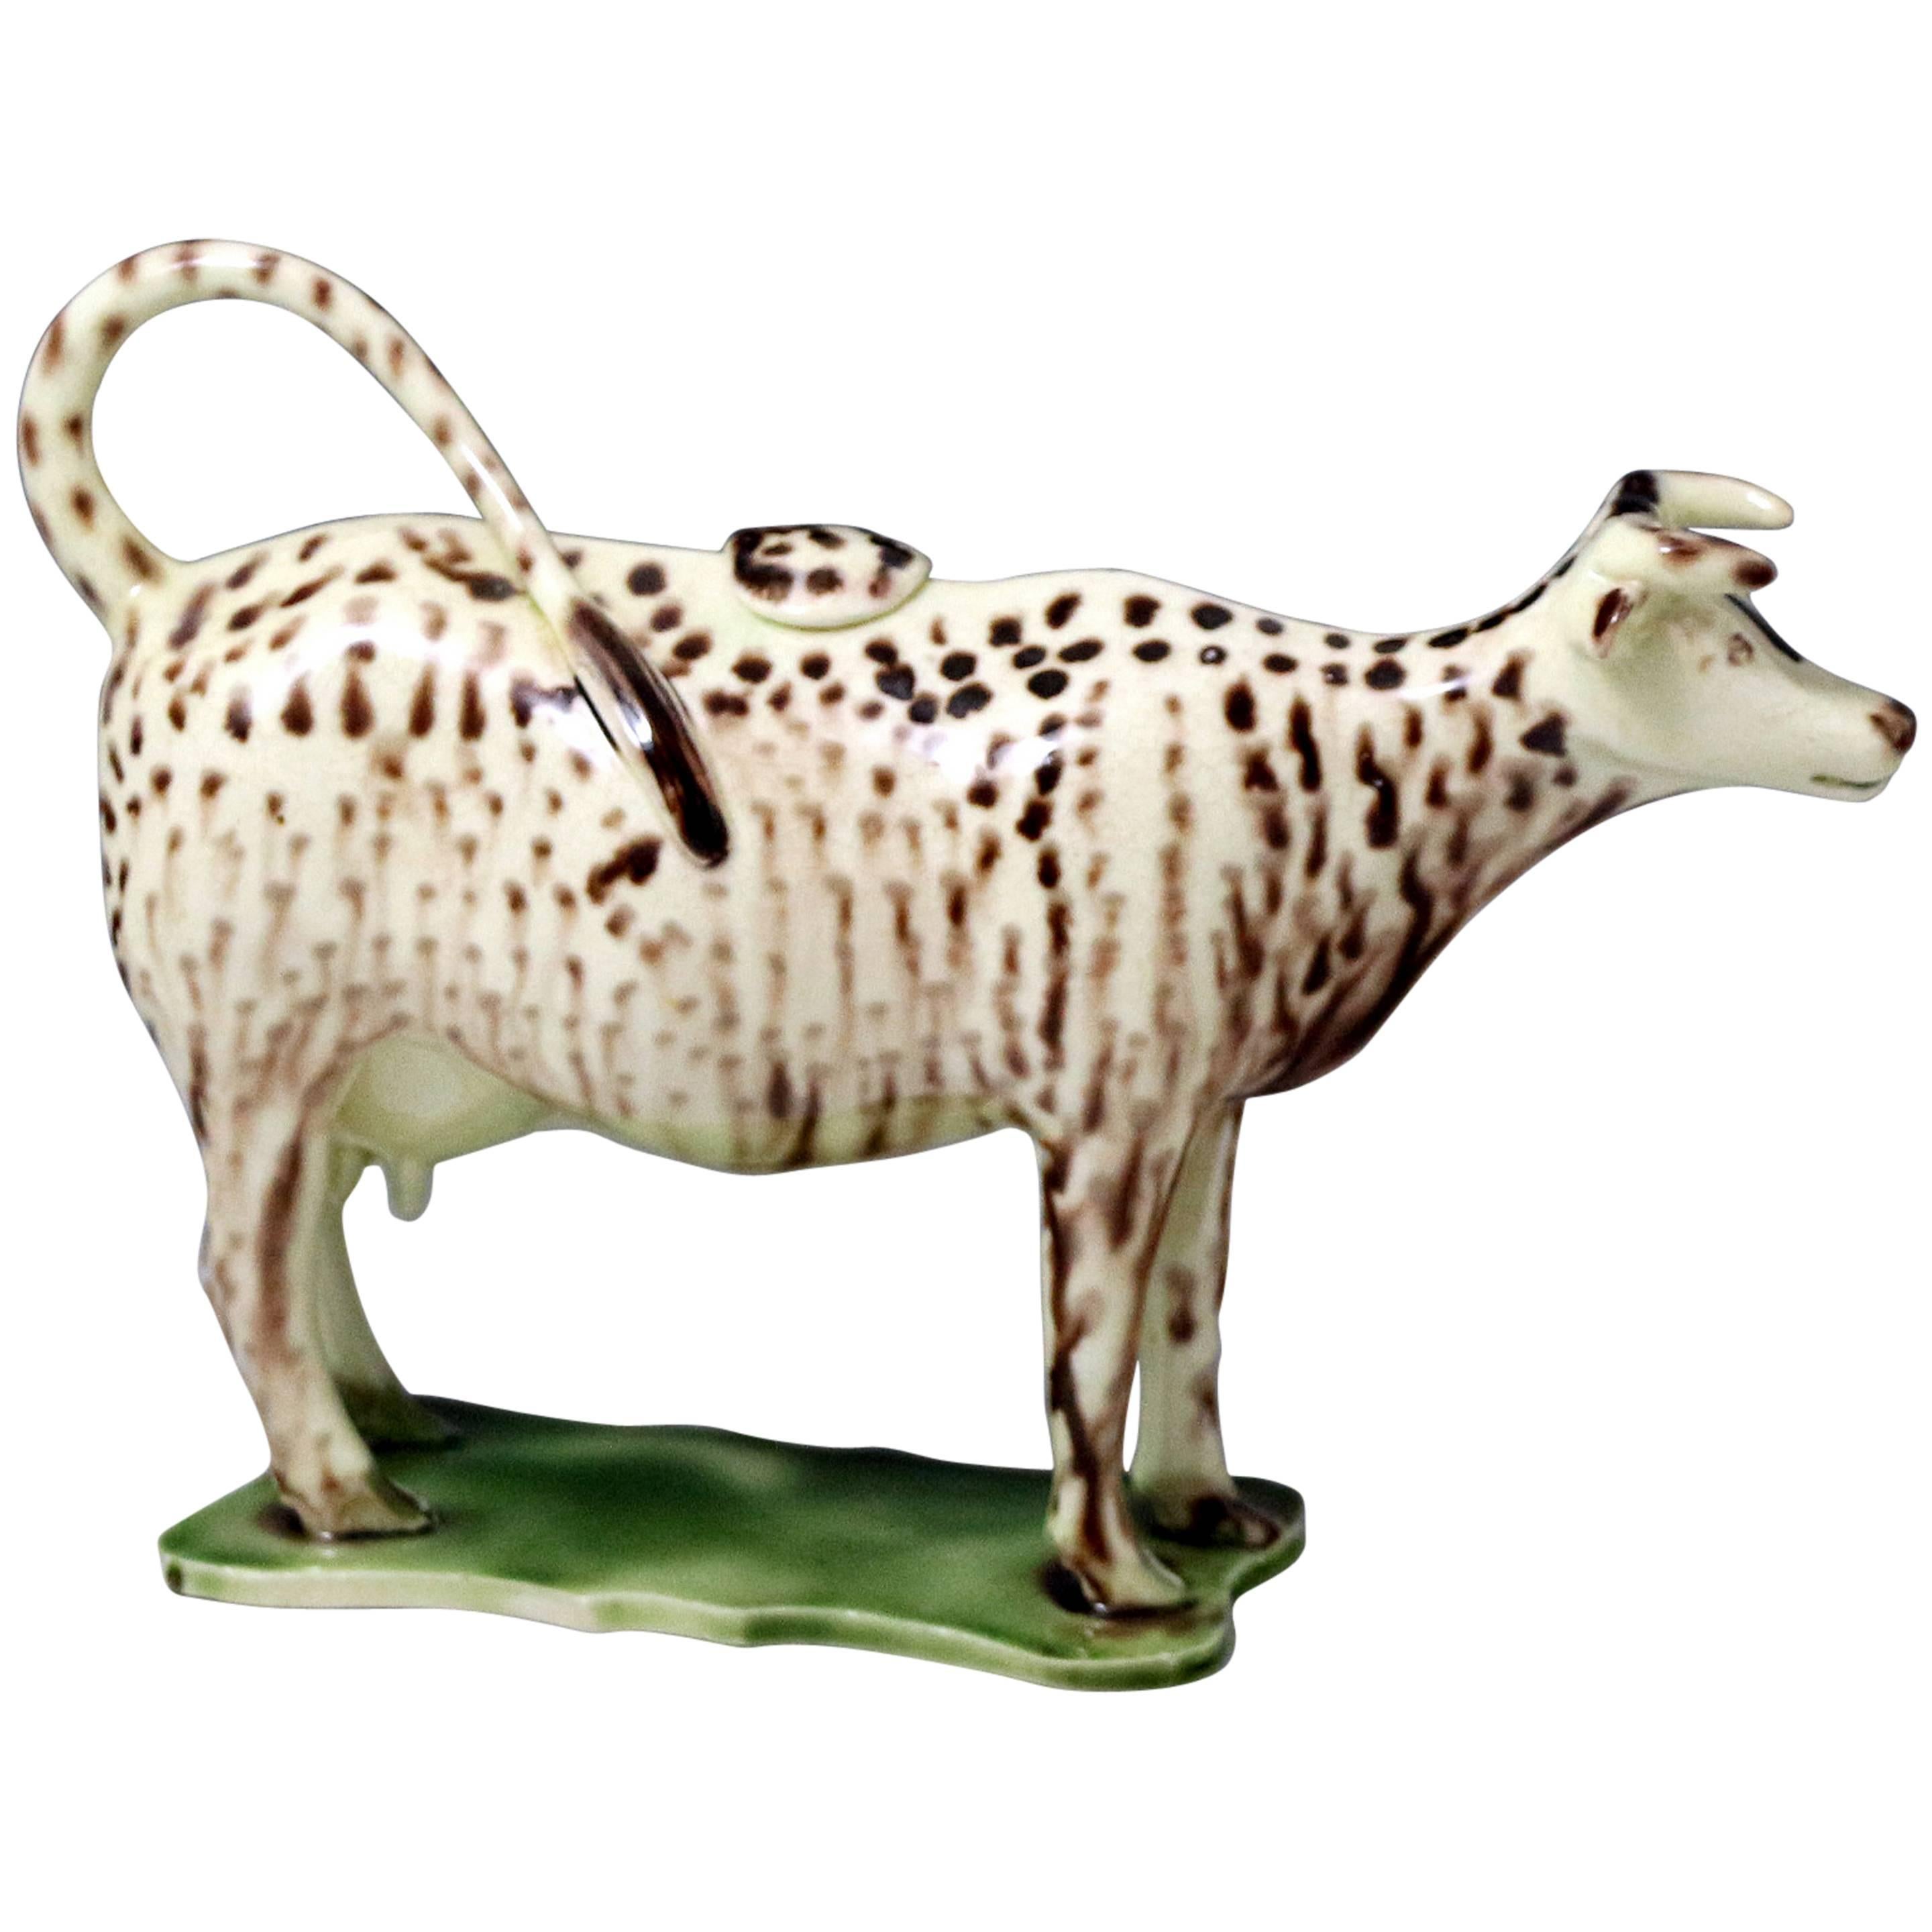 Early English pottery creamware bodied cow creamer figure  For Sale